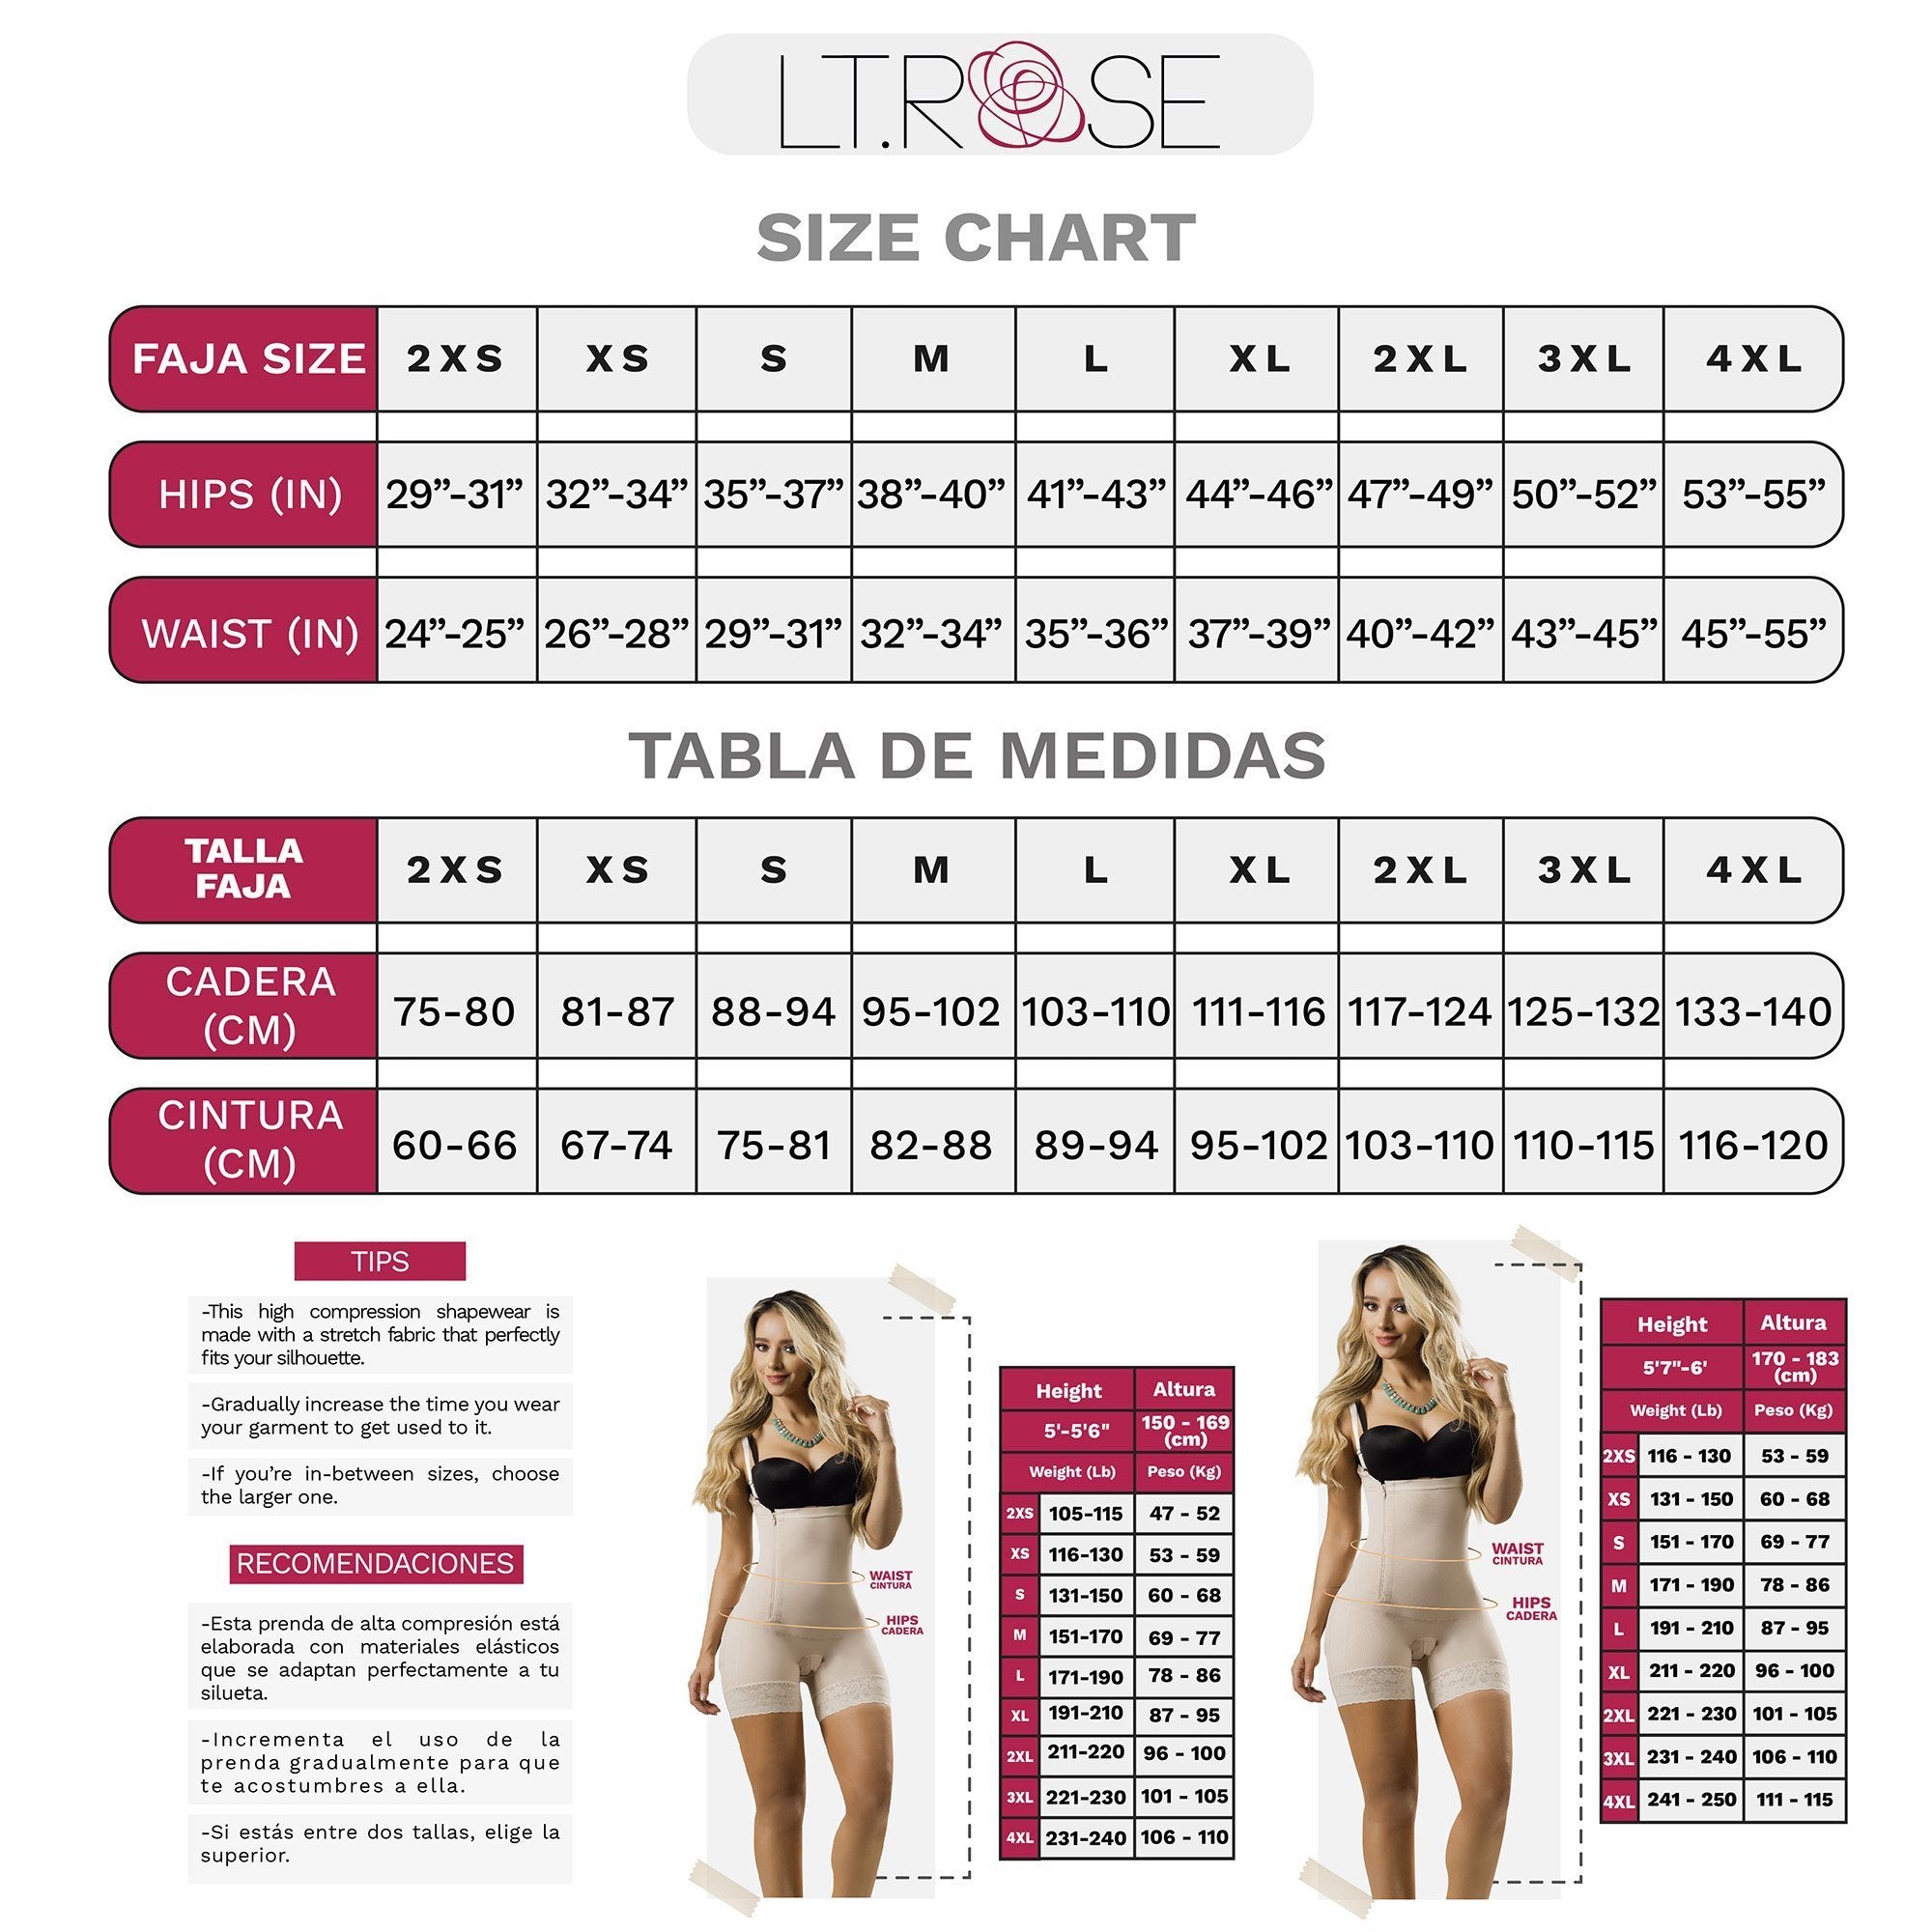 LATY ROSE 210210 Open Bust Tummy Control Butt Lifting Colombian Shapewear/Everyday Use Girdles - New England Supplier